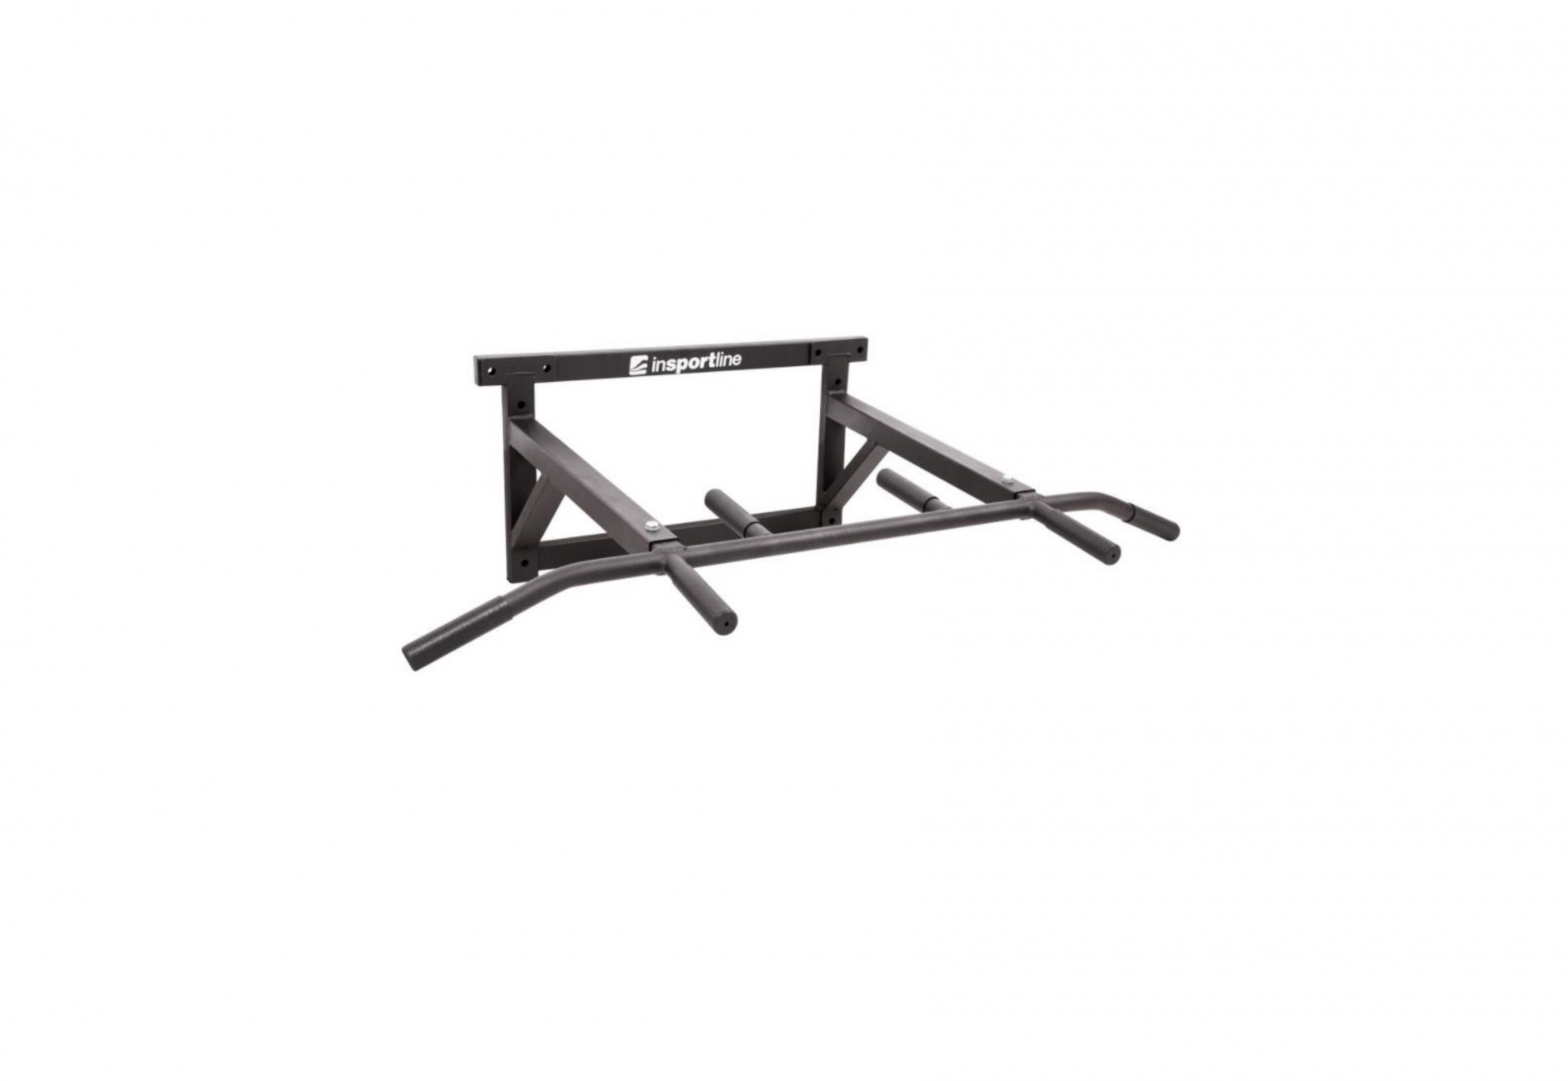 insportline 10024 Wall Mounted Pull Up Bar RK130 User Manual